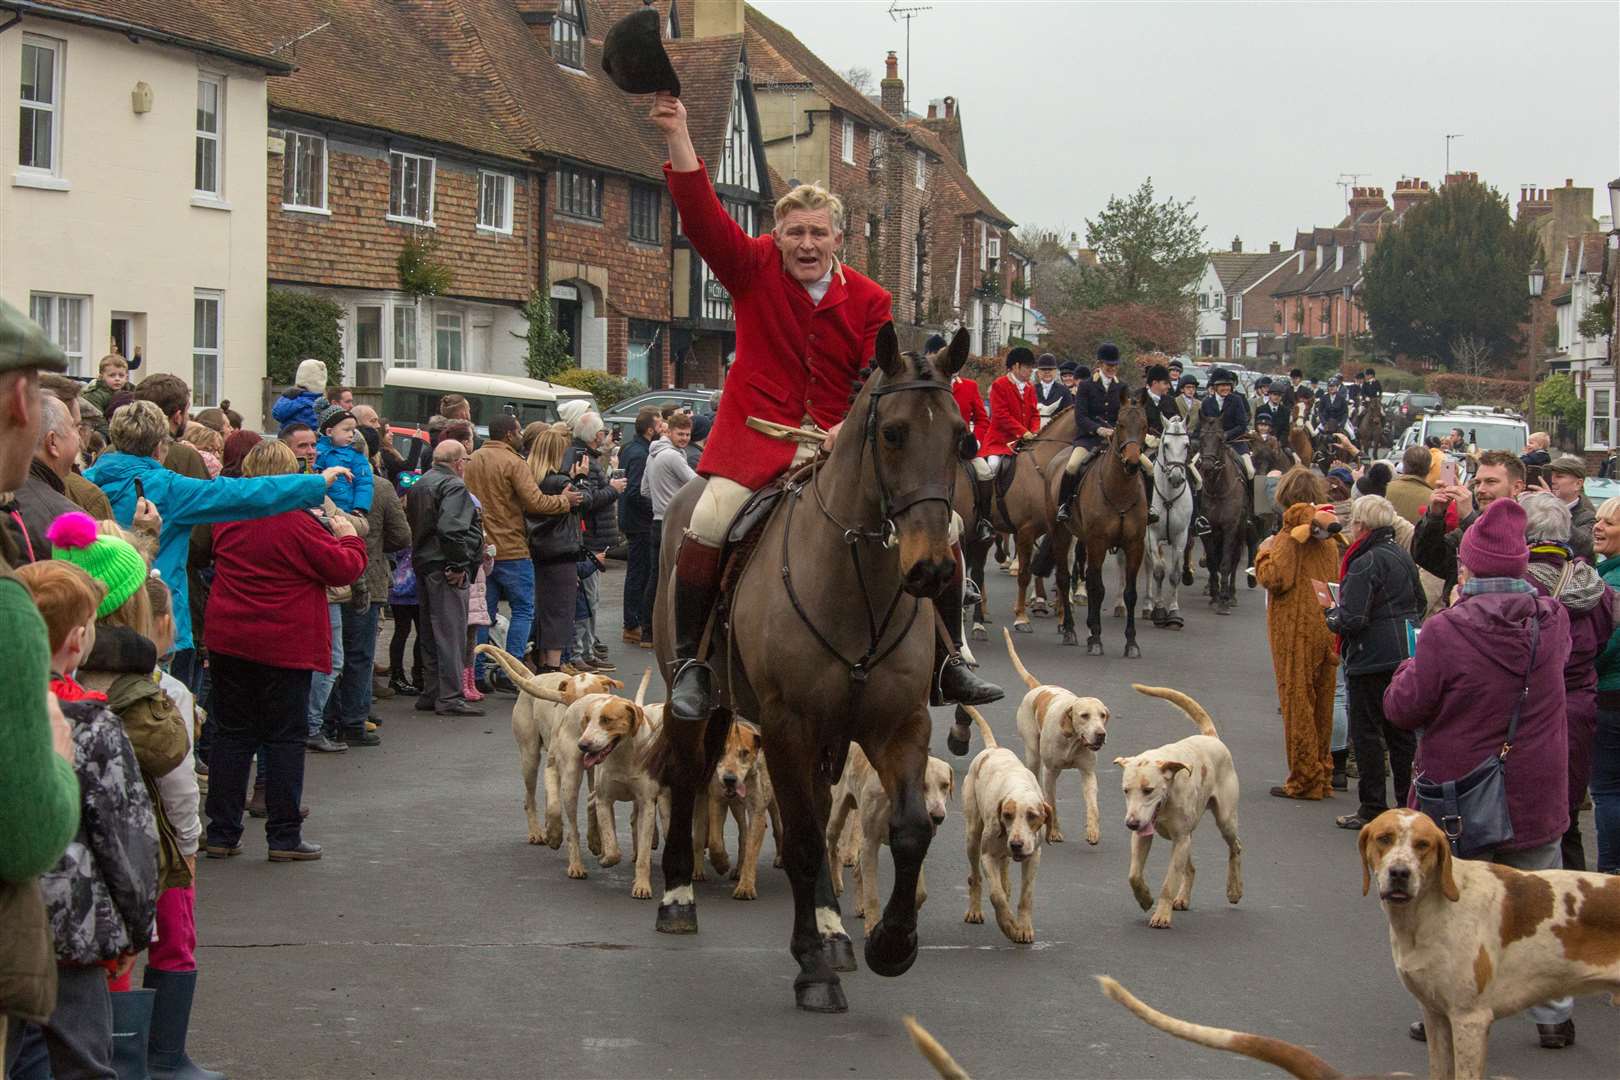 Spectators and riders attend the 2018 Boxing Day hunt in Elham